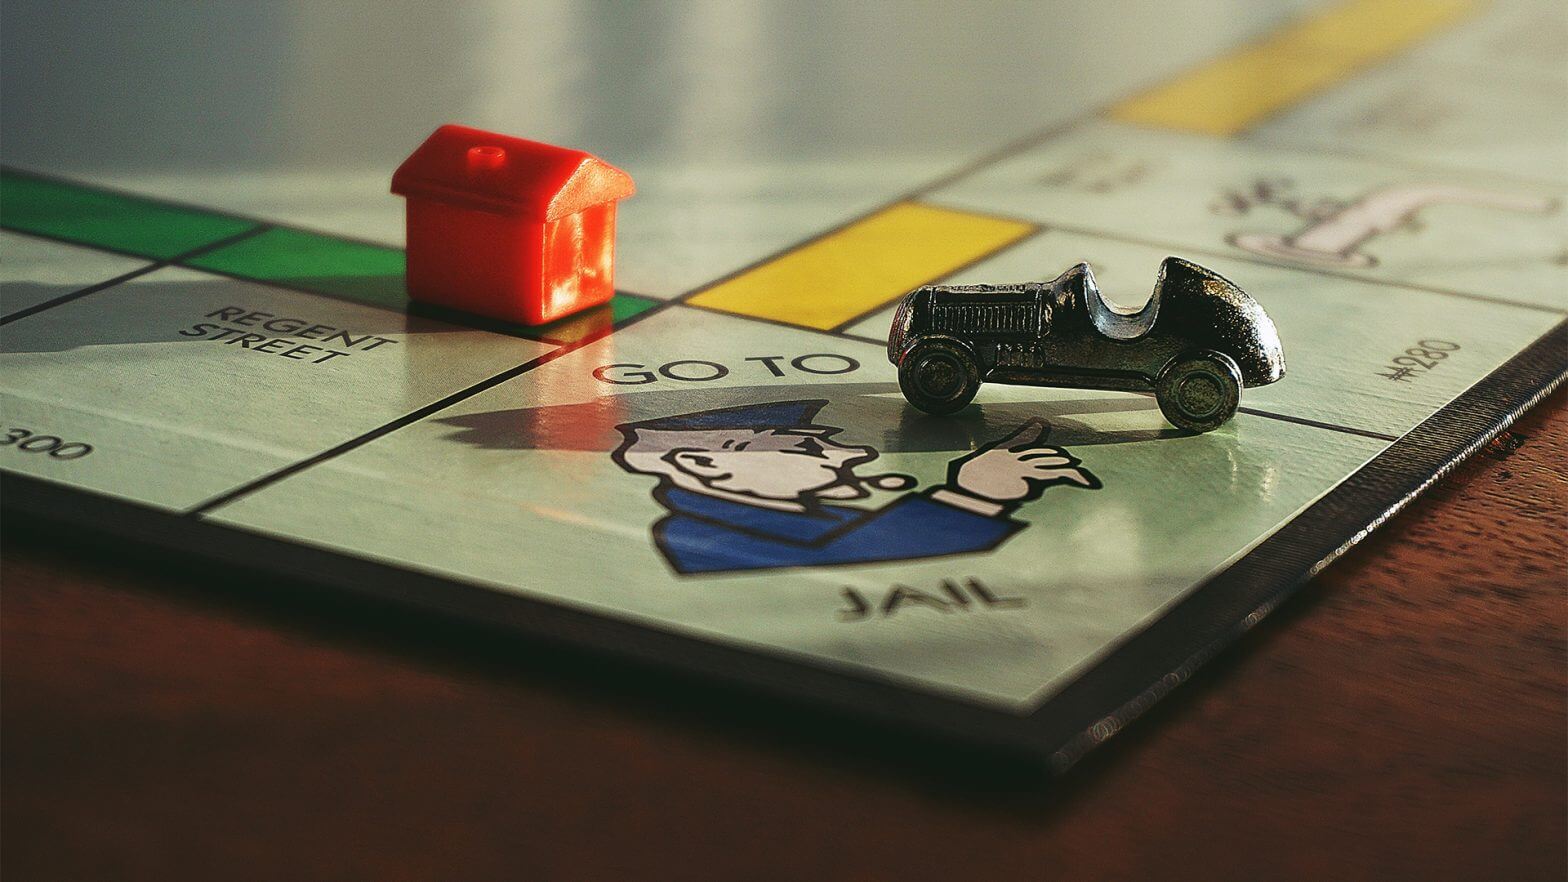 Monopoly "Go To Jail"